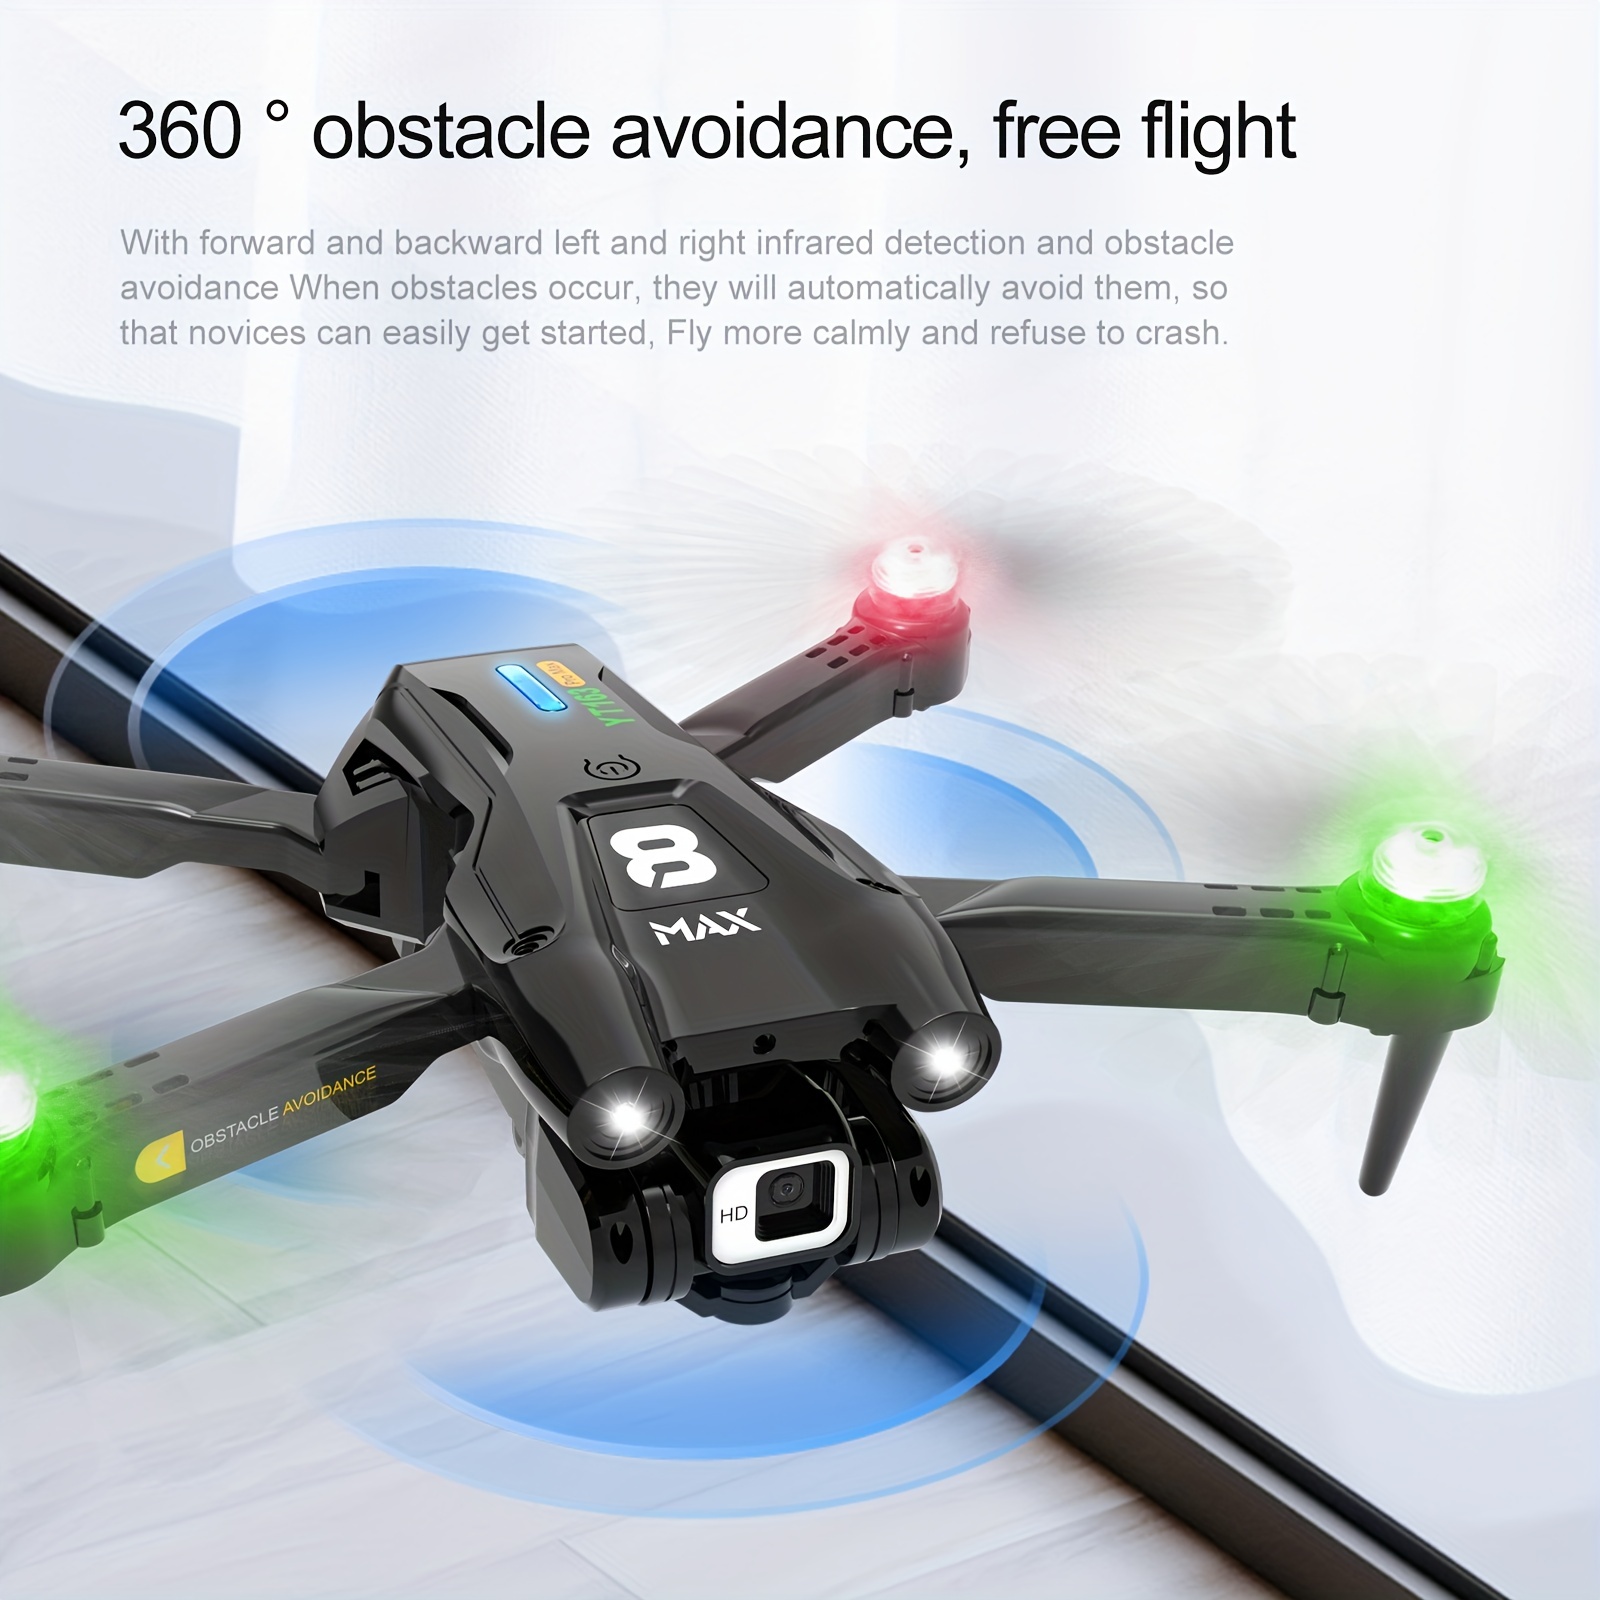 yt163 foldable drone remote control and app control easy to carry four sided sensor obstacle avoidance stable flight one key return high definition camera camera angle adjustable drone details 8